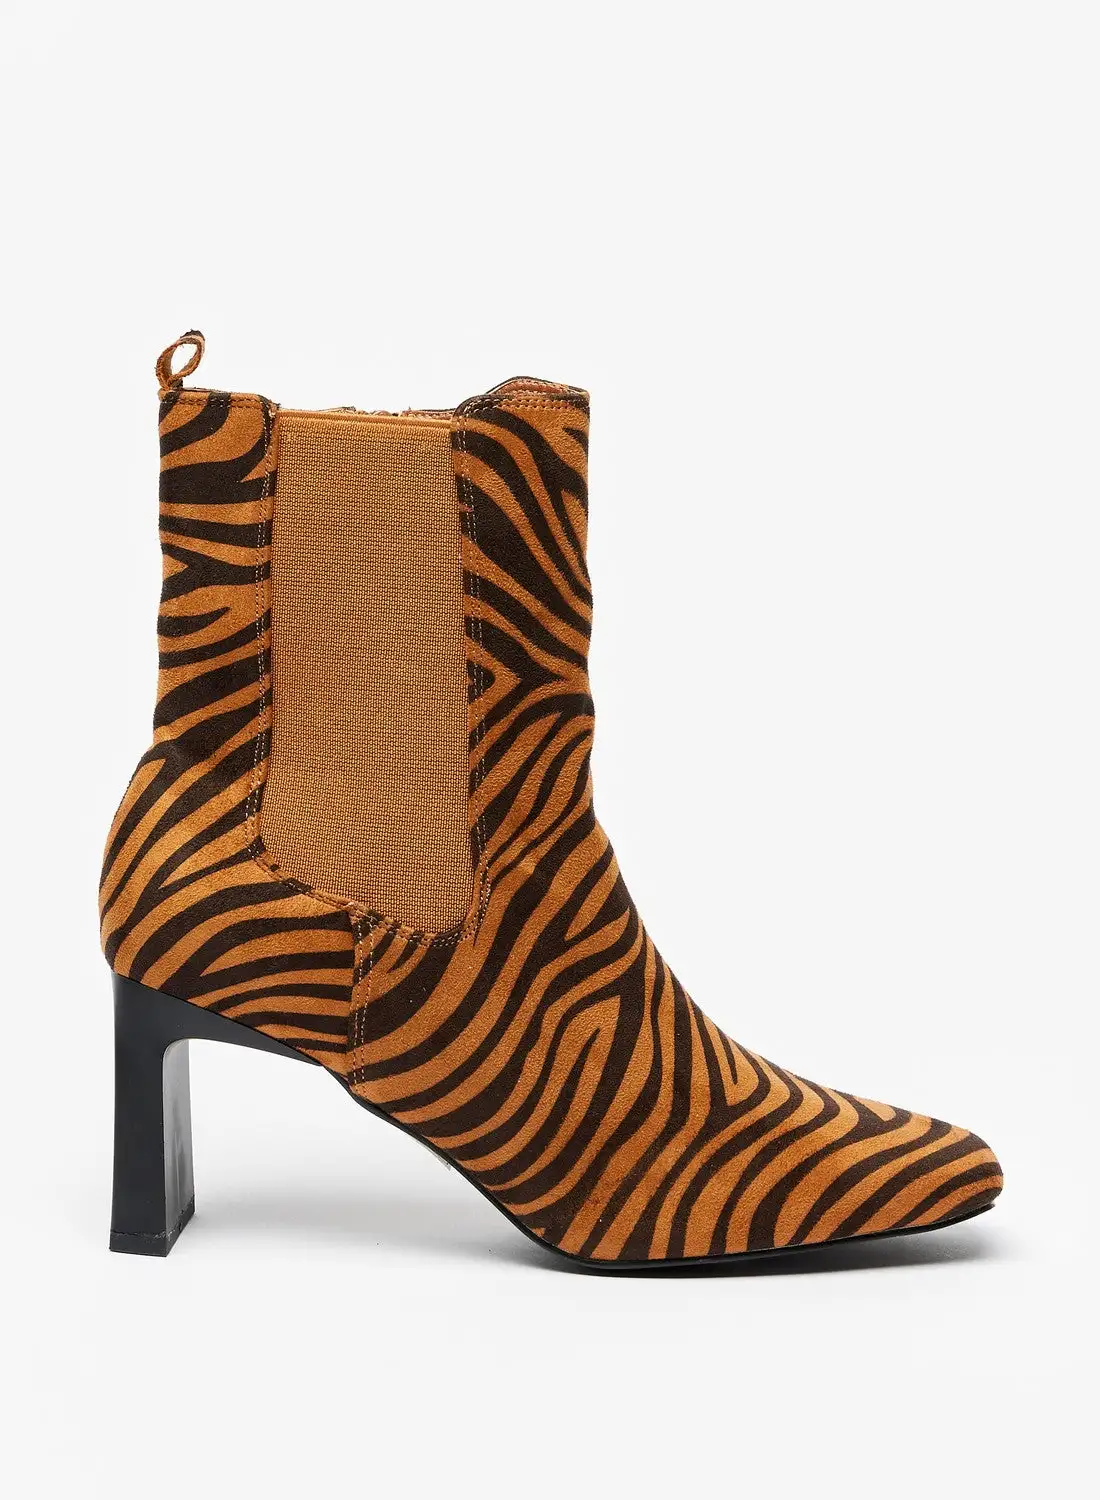 shoexpress Womens Animal Print Ankle Boots with Zip Closure and Block Heels Brown